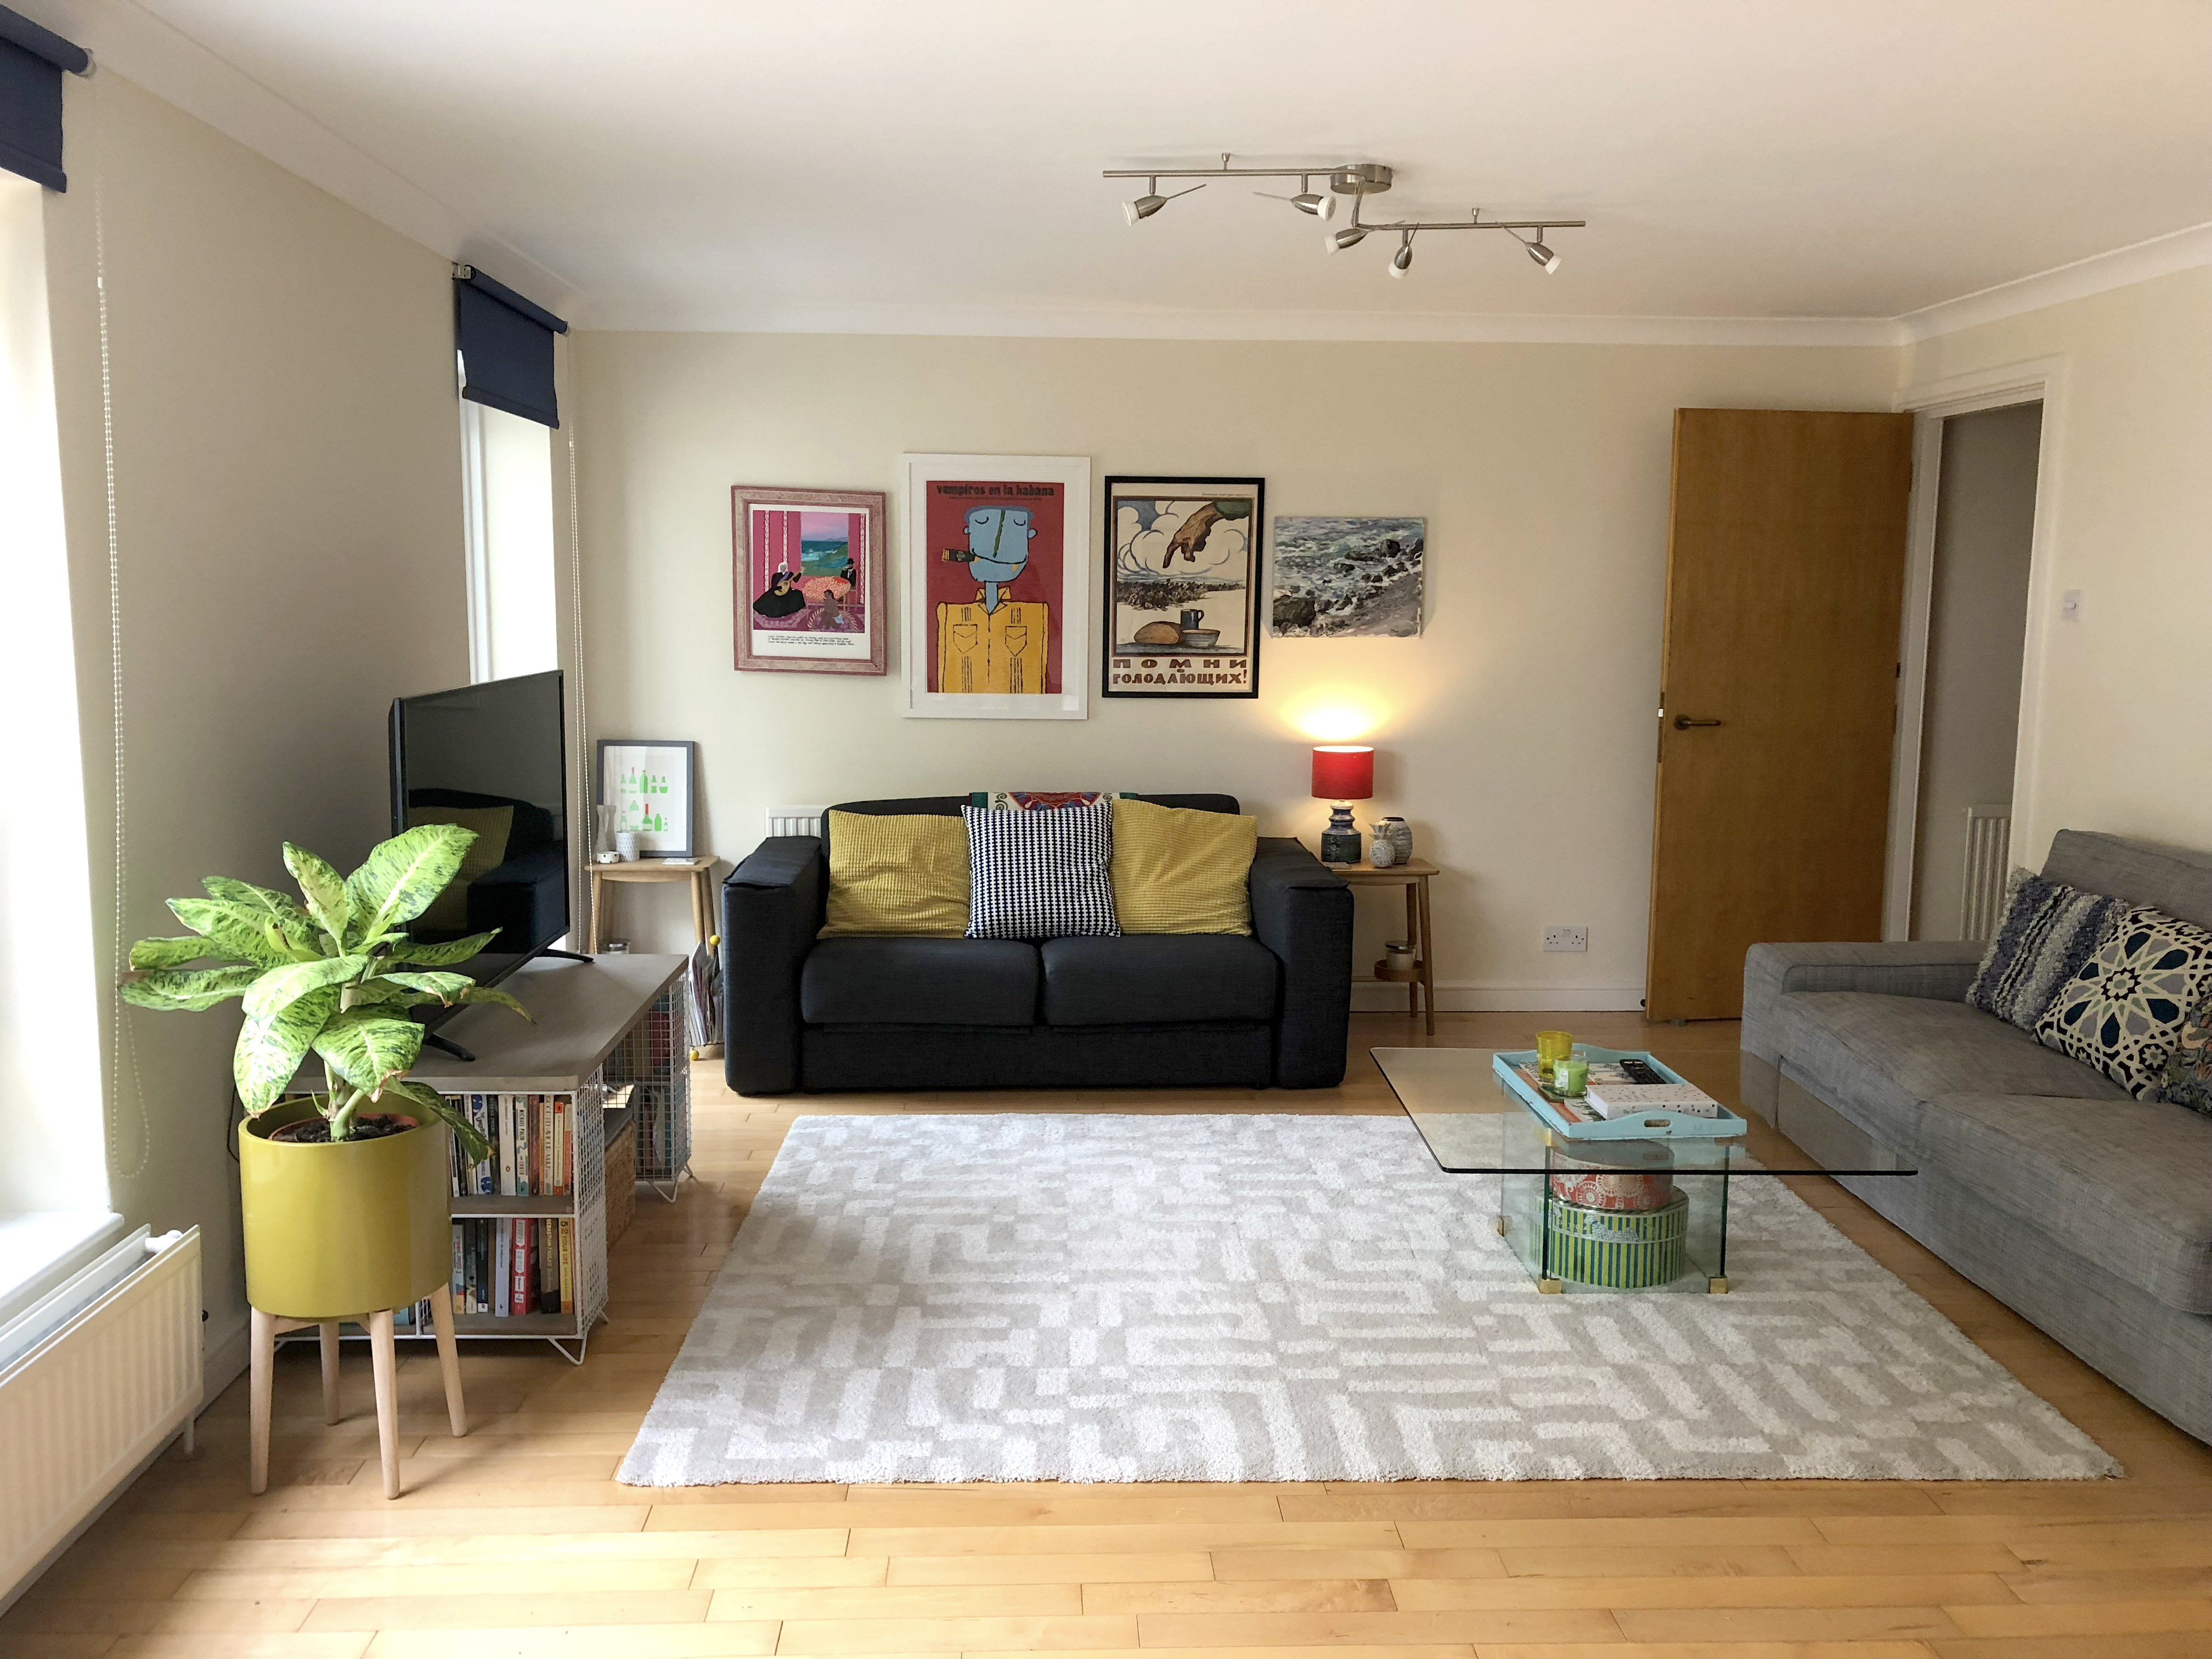 Colourful living room with big white and grey area rug and a glass coffee table